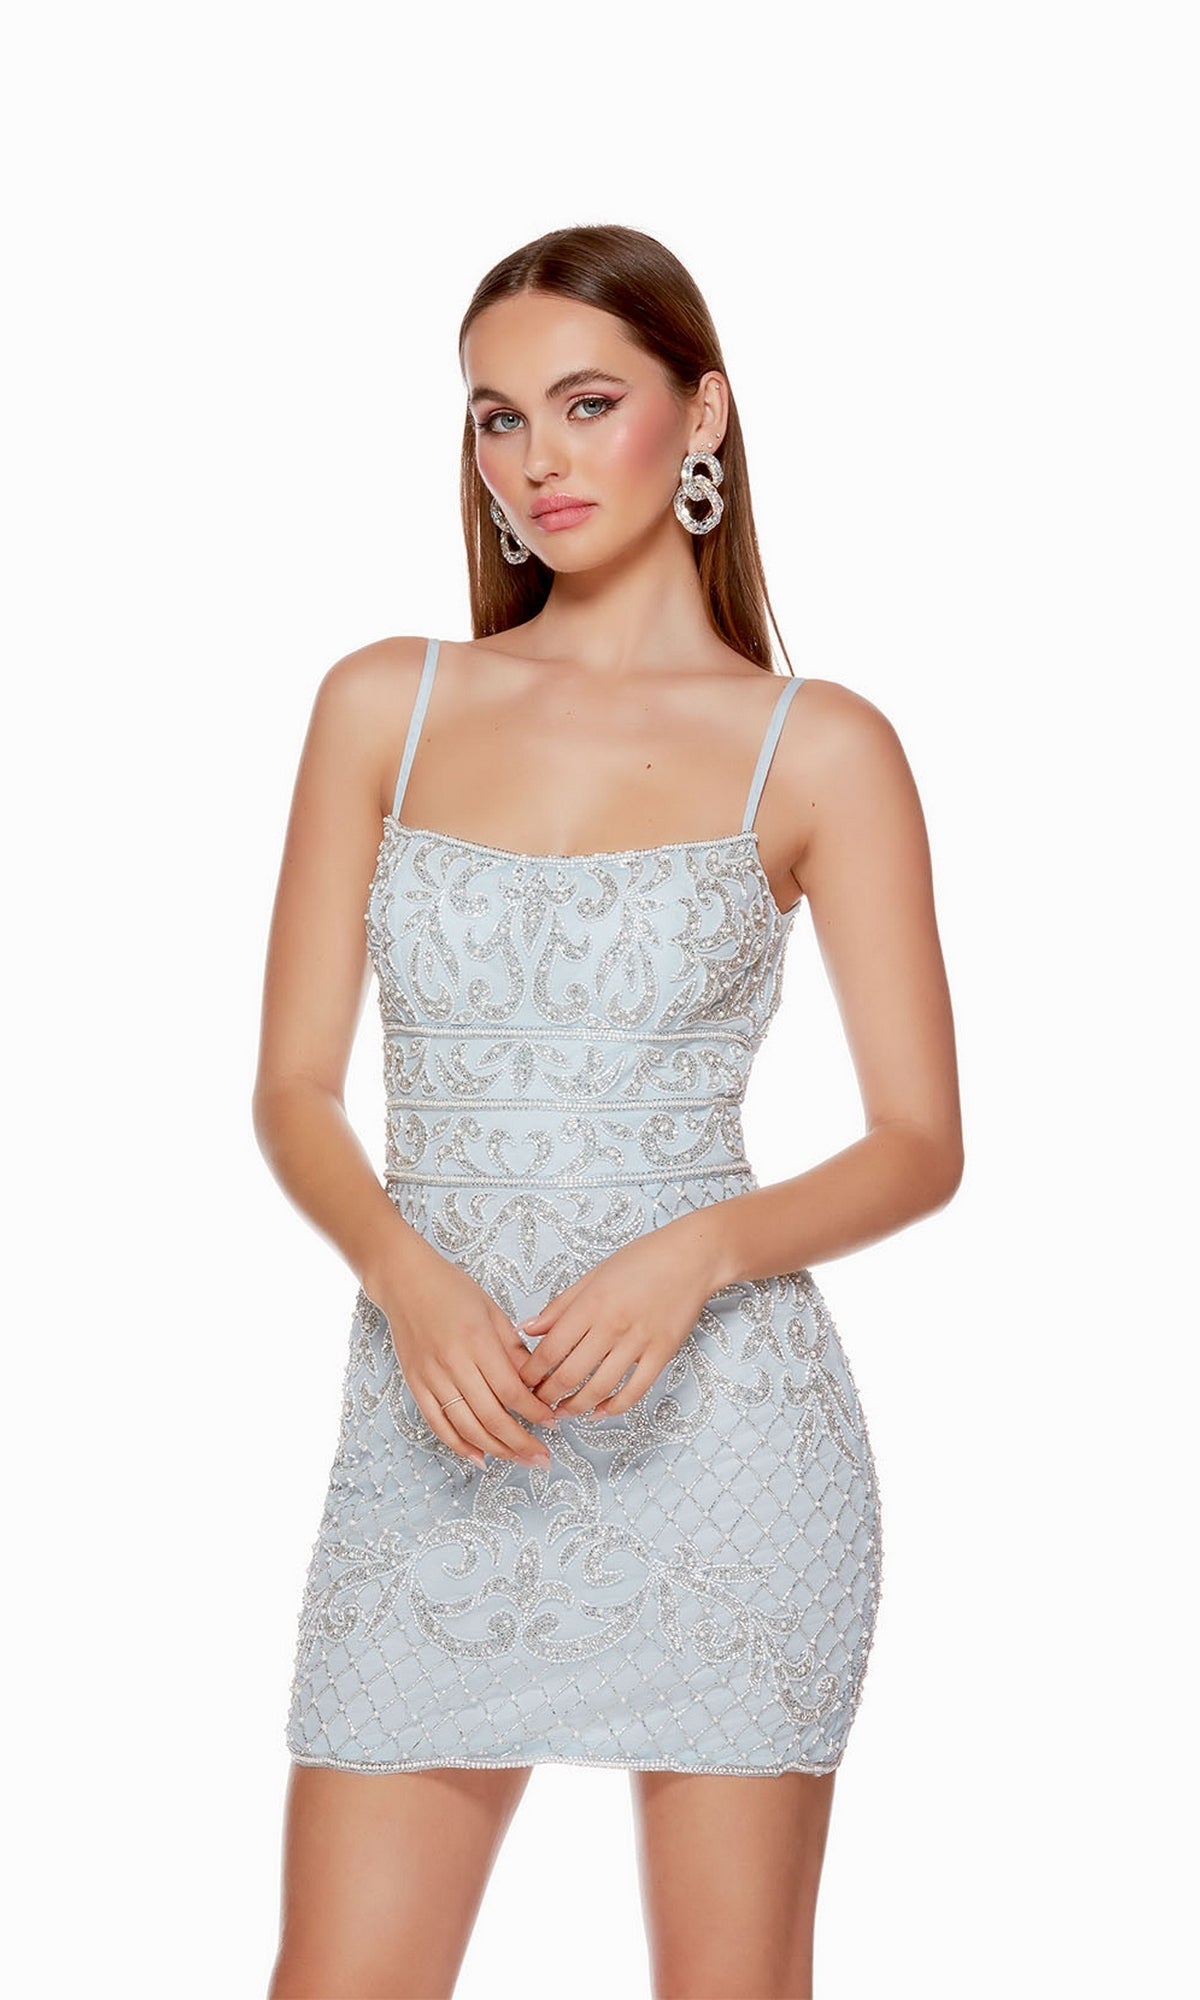  Short Dress By Alyce For Homecoming 4660